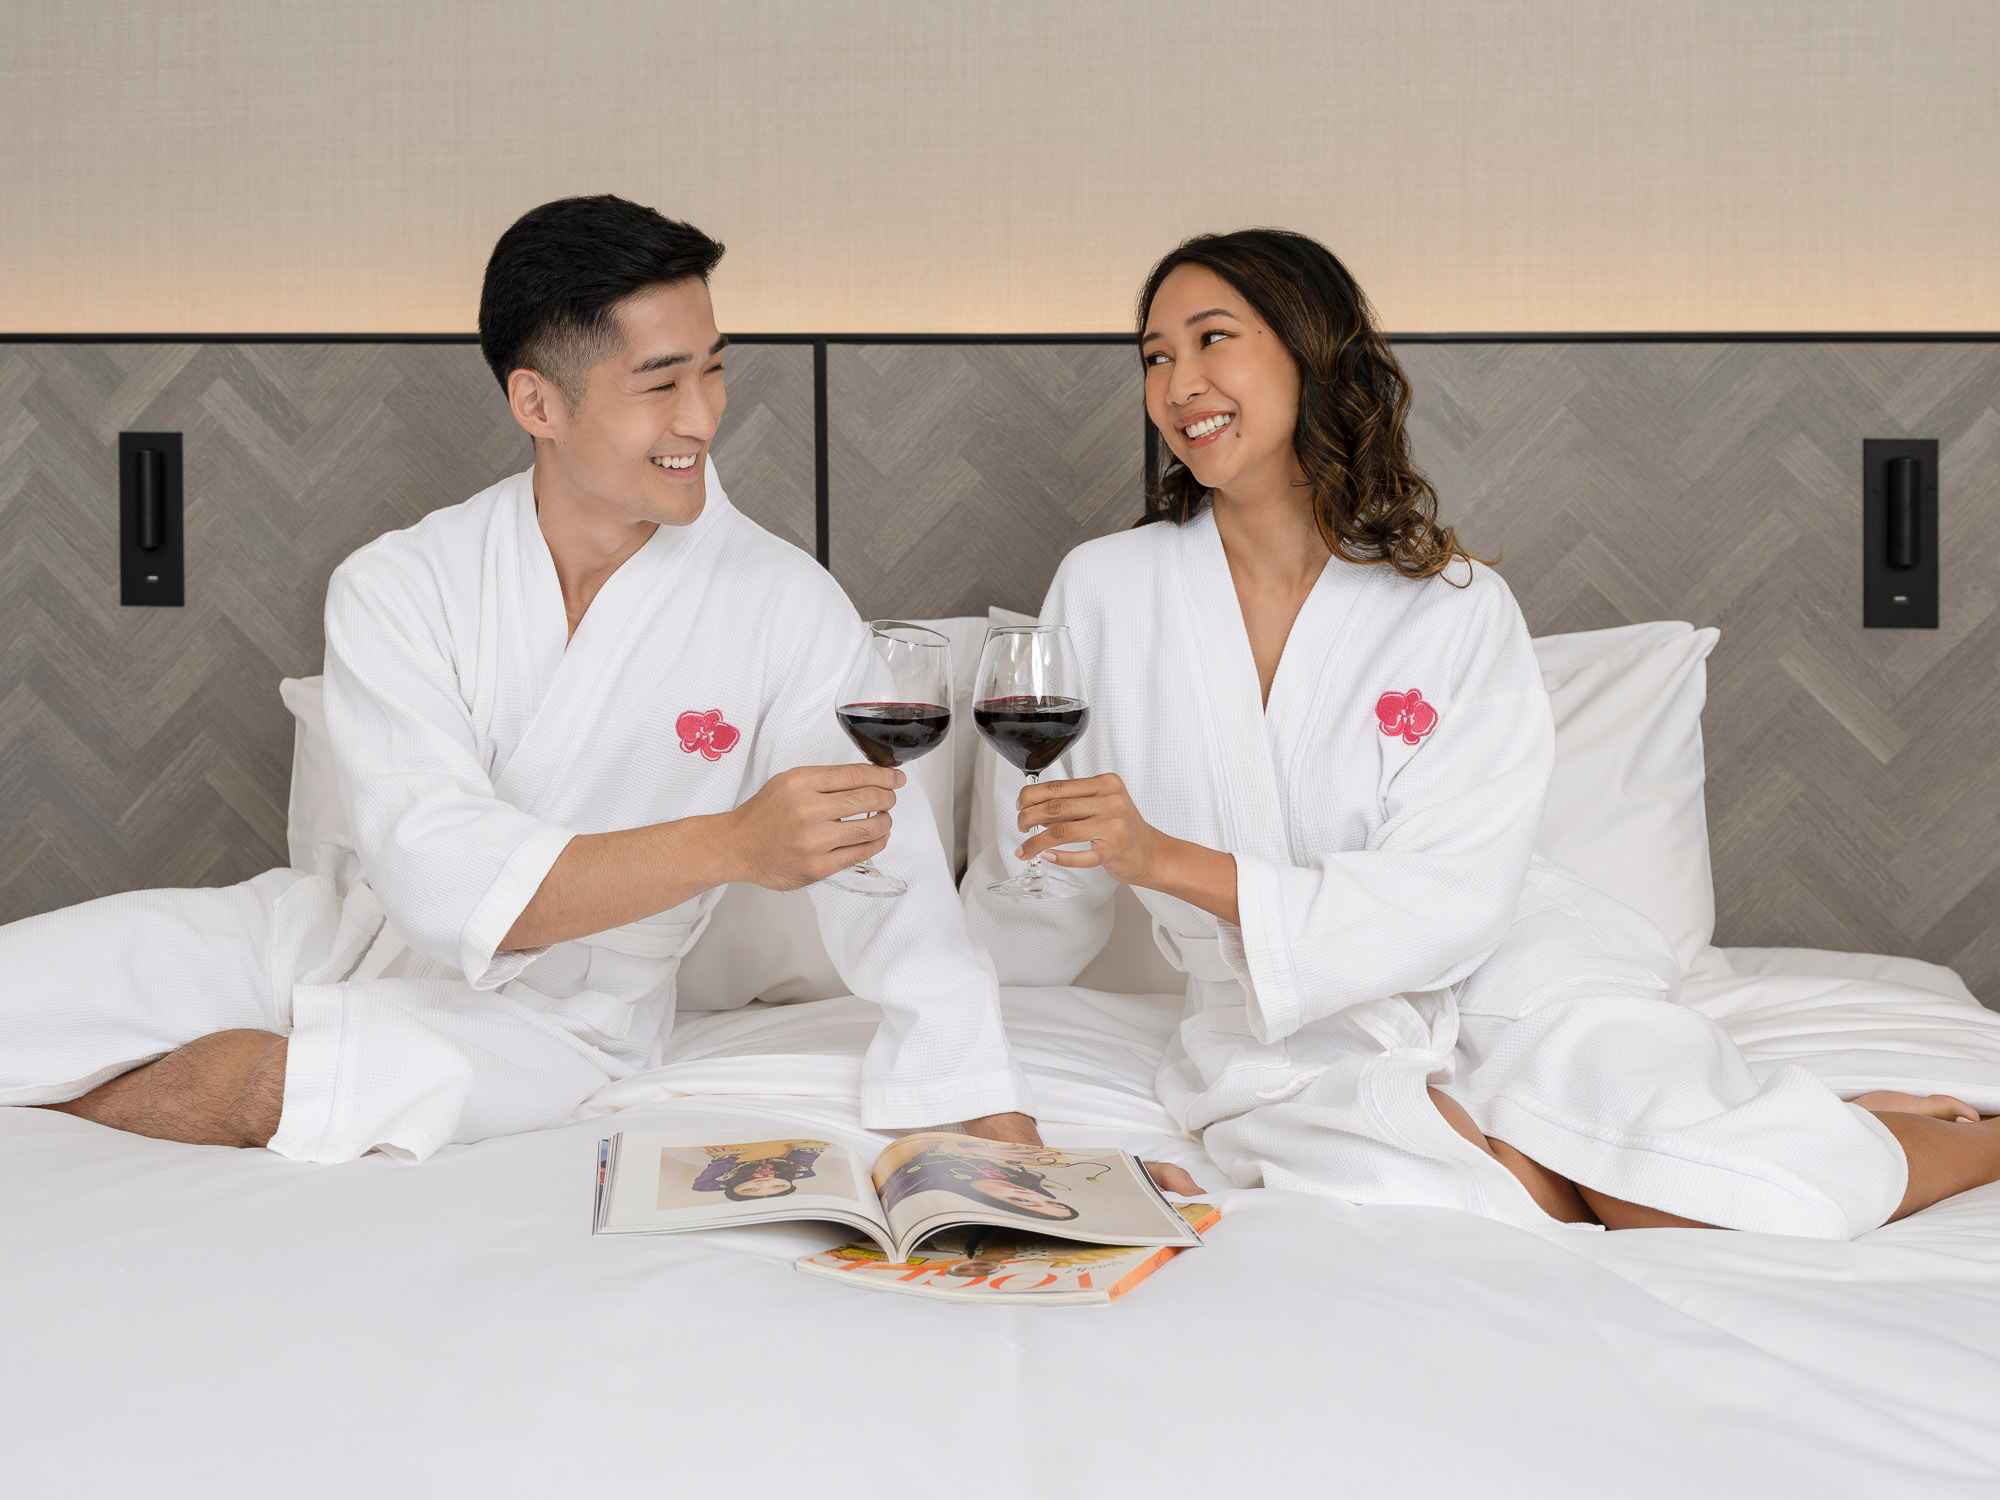 Couple cheers in bed at orchid hotel, photo taken by coco creative studio lifestyle shoot-Orchid-lifestyle-interior-hospitality-photgraphy-coco-creative-studio-singapore-france